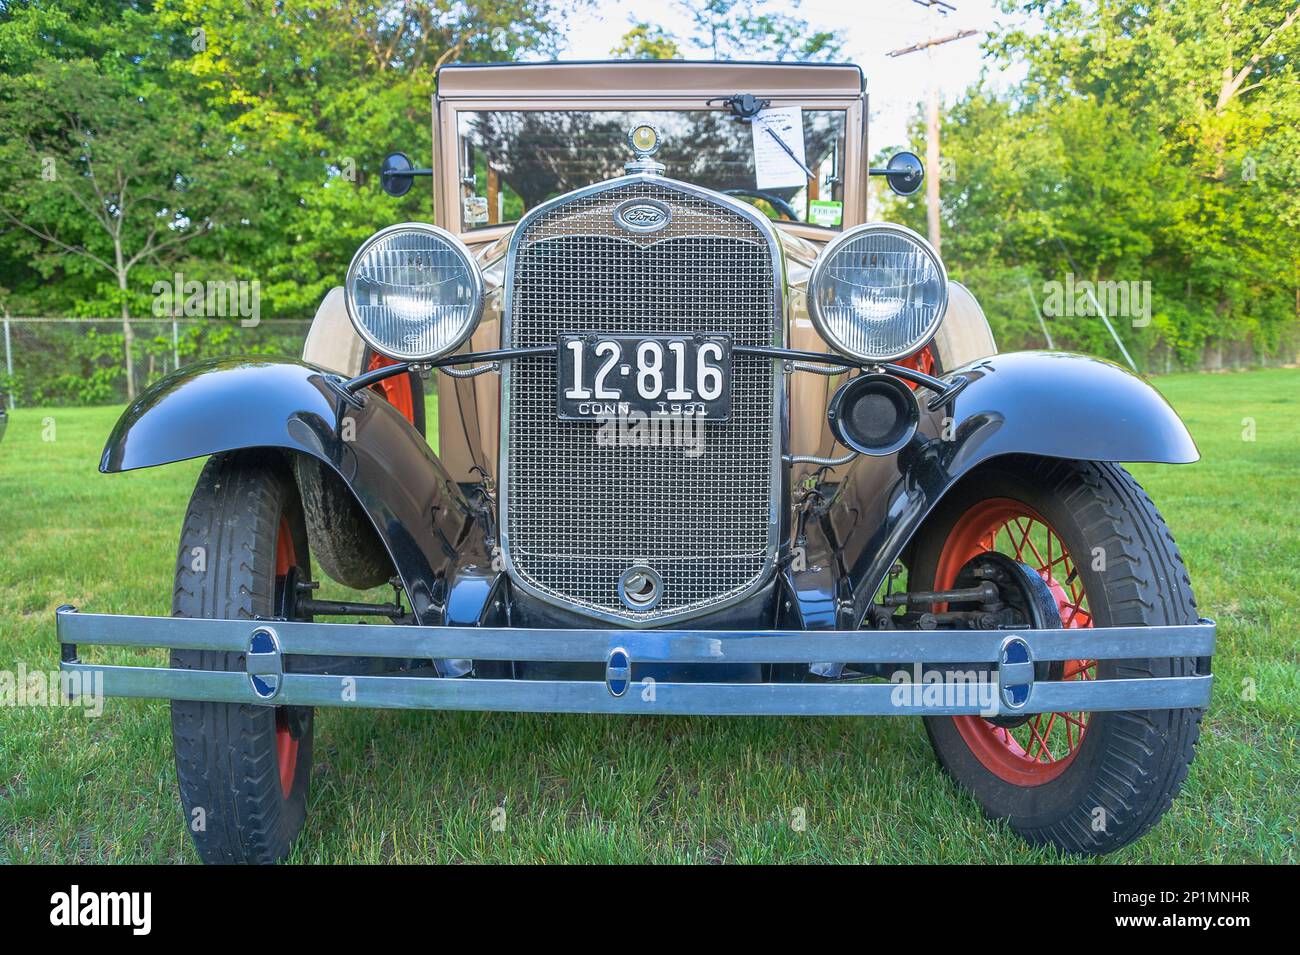 Essex, CT, USA - 24 May 2011: 1931 vintage Ford Model A automobile parked on a quiet New England village green. Stock Photo